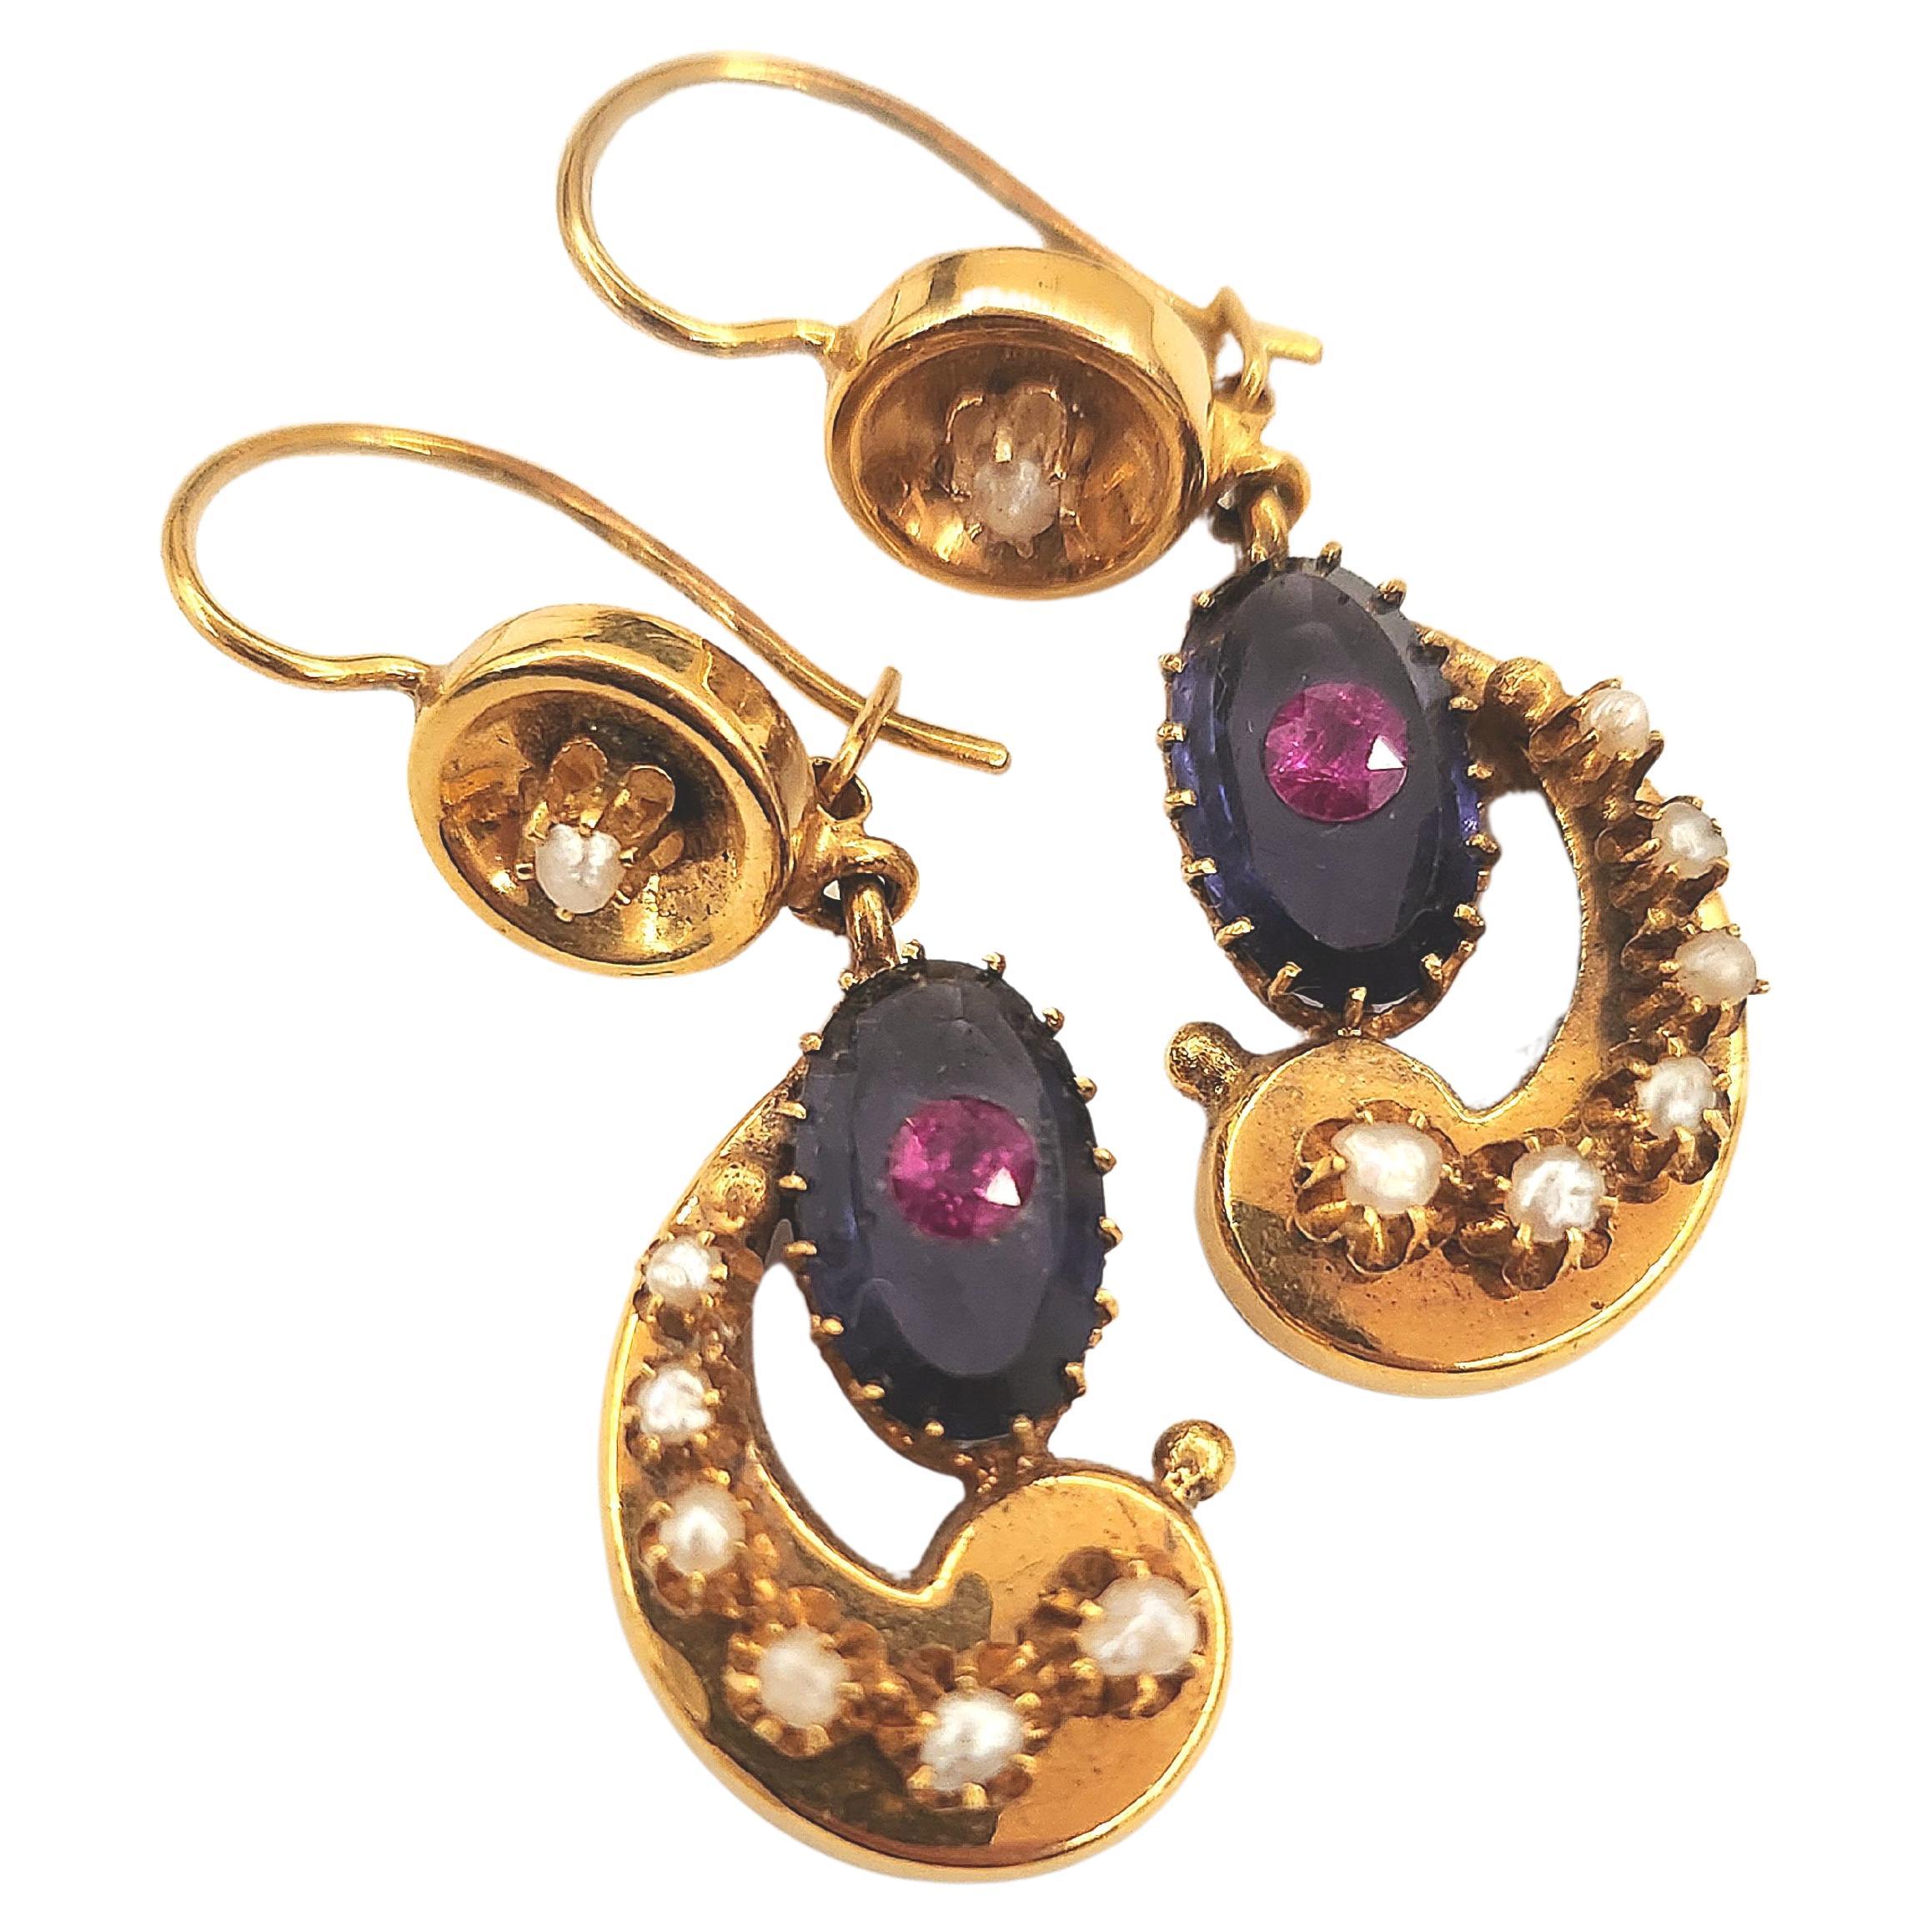 Antique 14k gold earrings with oval pink amethyst centeted with red rubie stone flanked with white seed pearls with total earrings lenght 4.5cm earrings was made in the caucasus region during the imperial russian era 1907/1910.c russian tsarist era